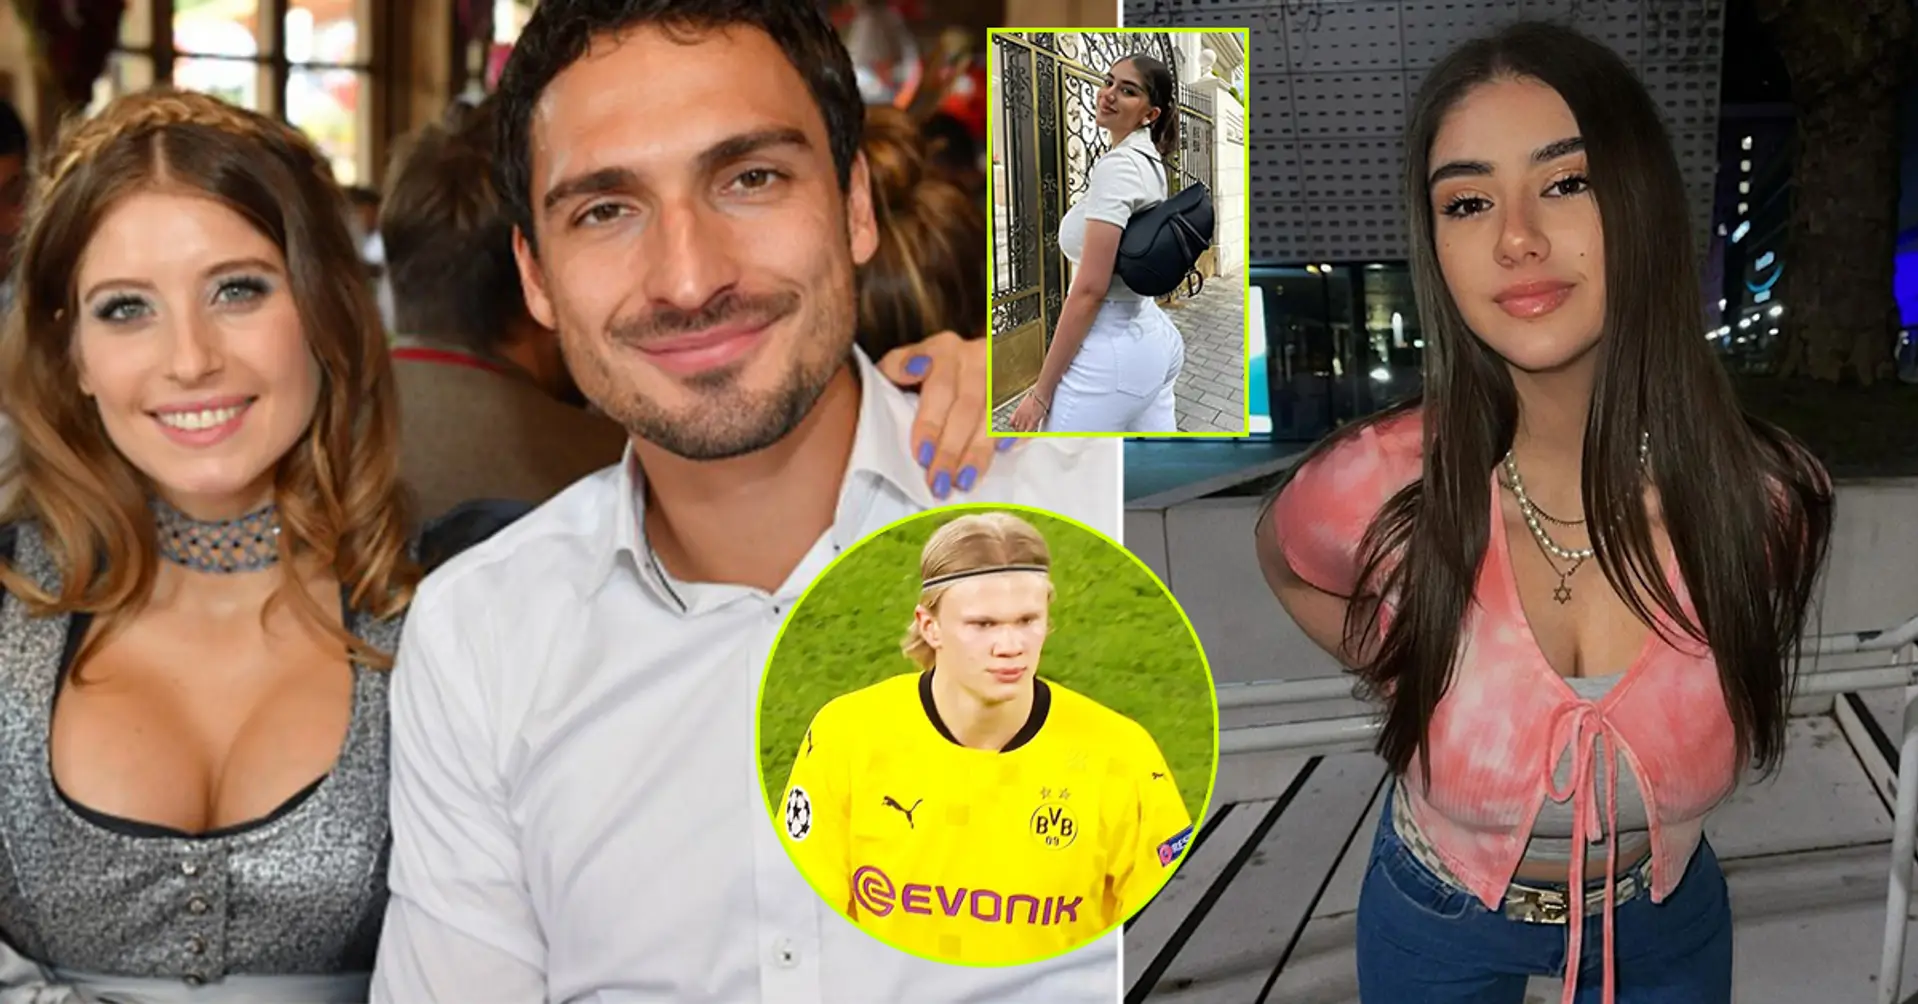 Mats Hummels reportedly divorcing wife to date a 20-year-old who asked Haaland to ‘marry her’